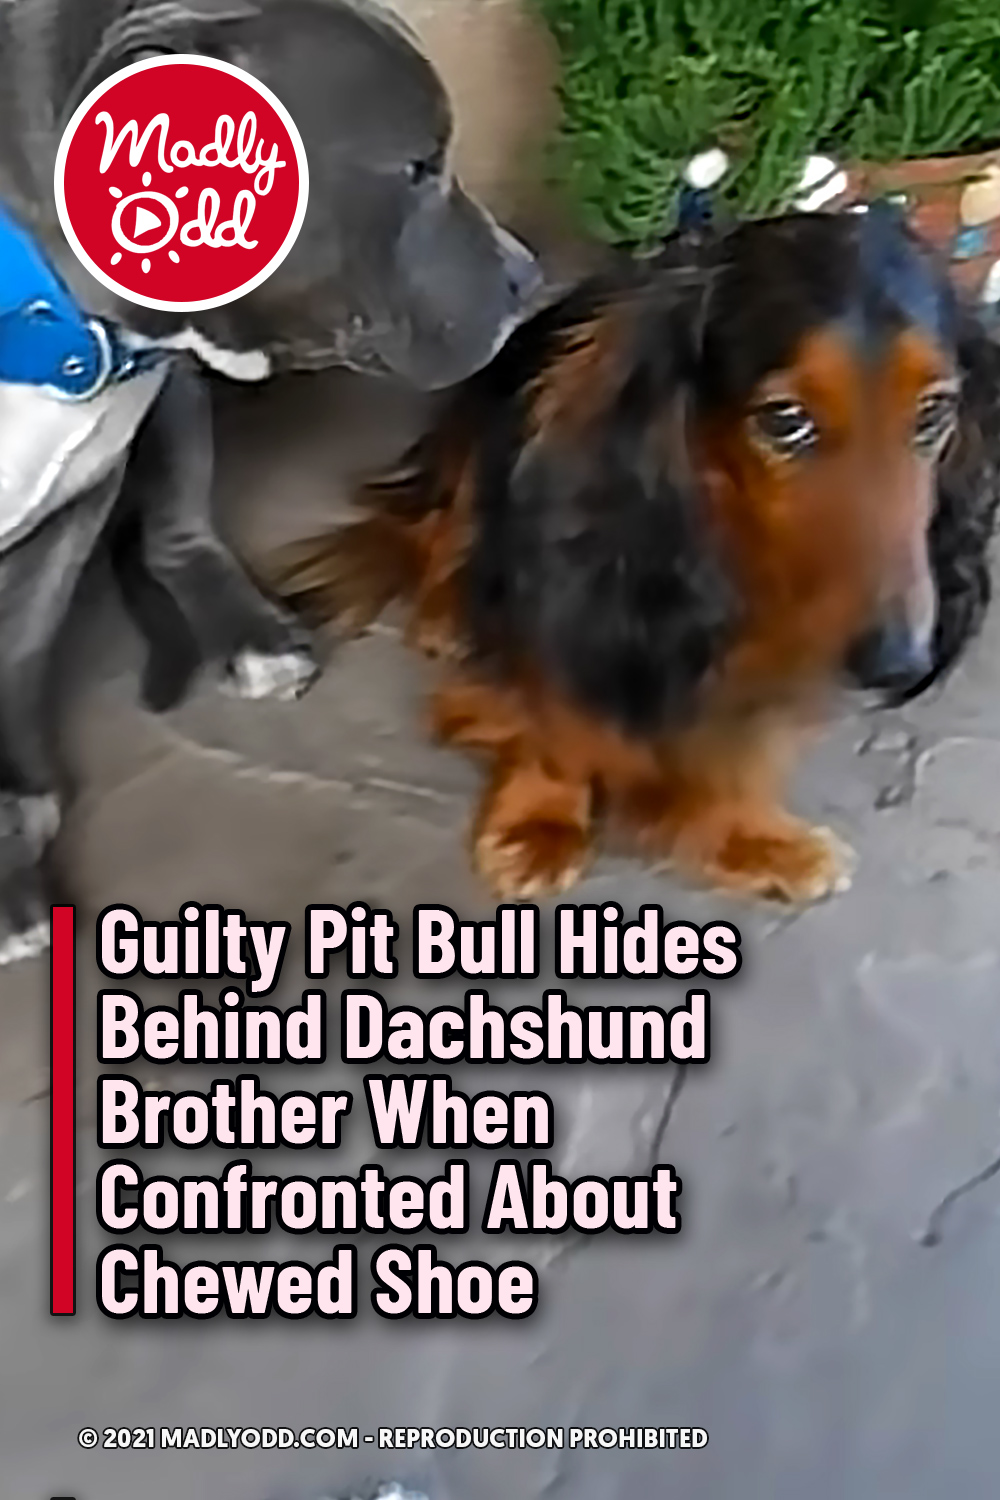 Guilty Pit Bull Hides Behind Dachshund Brother When Confronted About Chewed Shoe